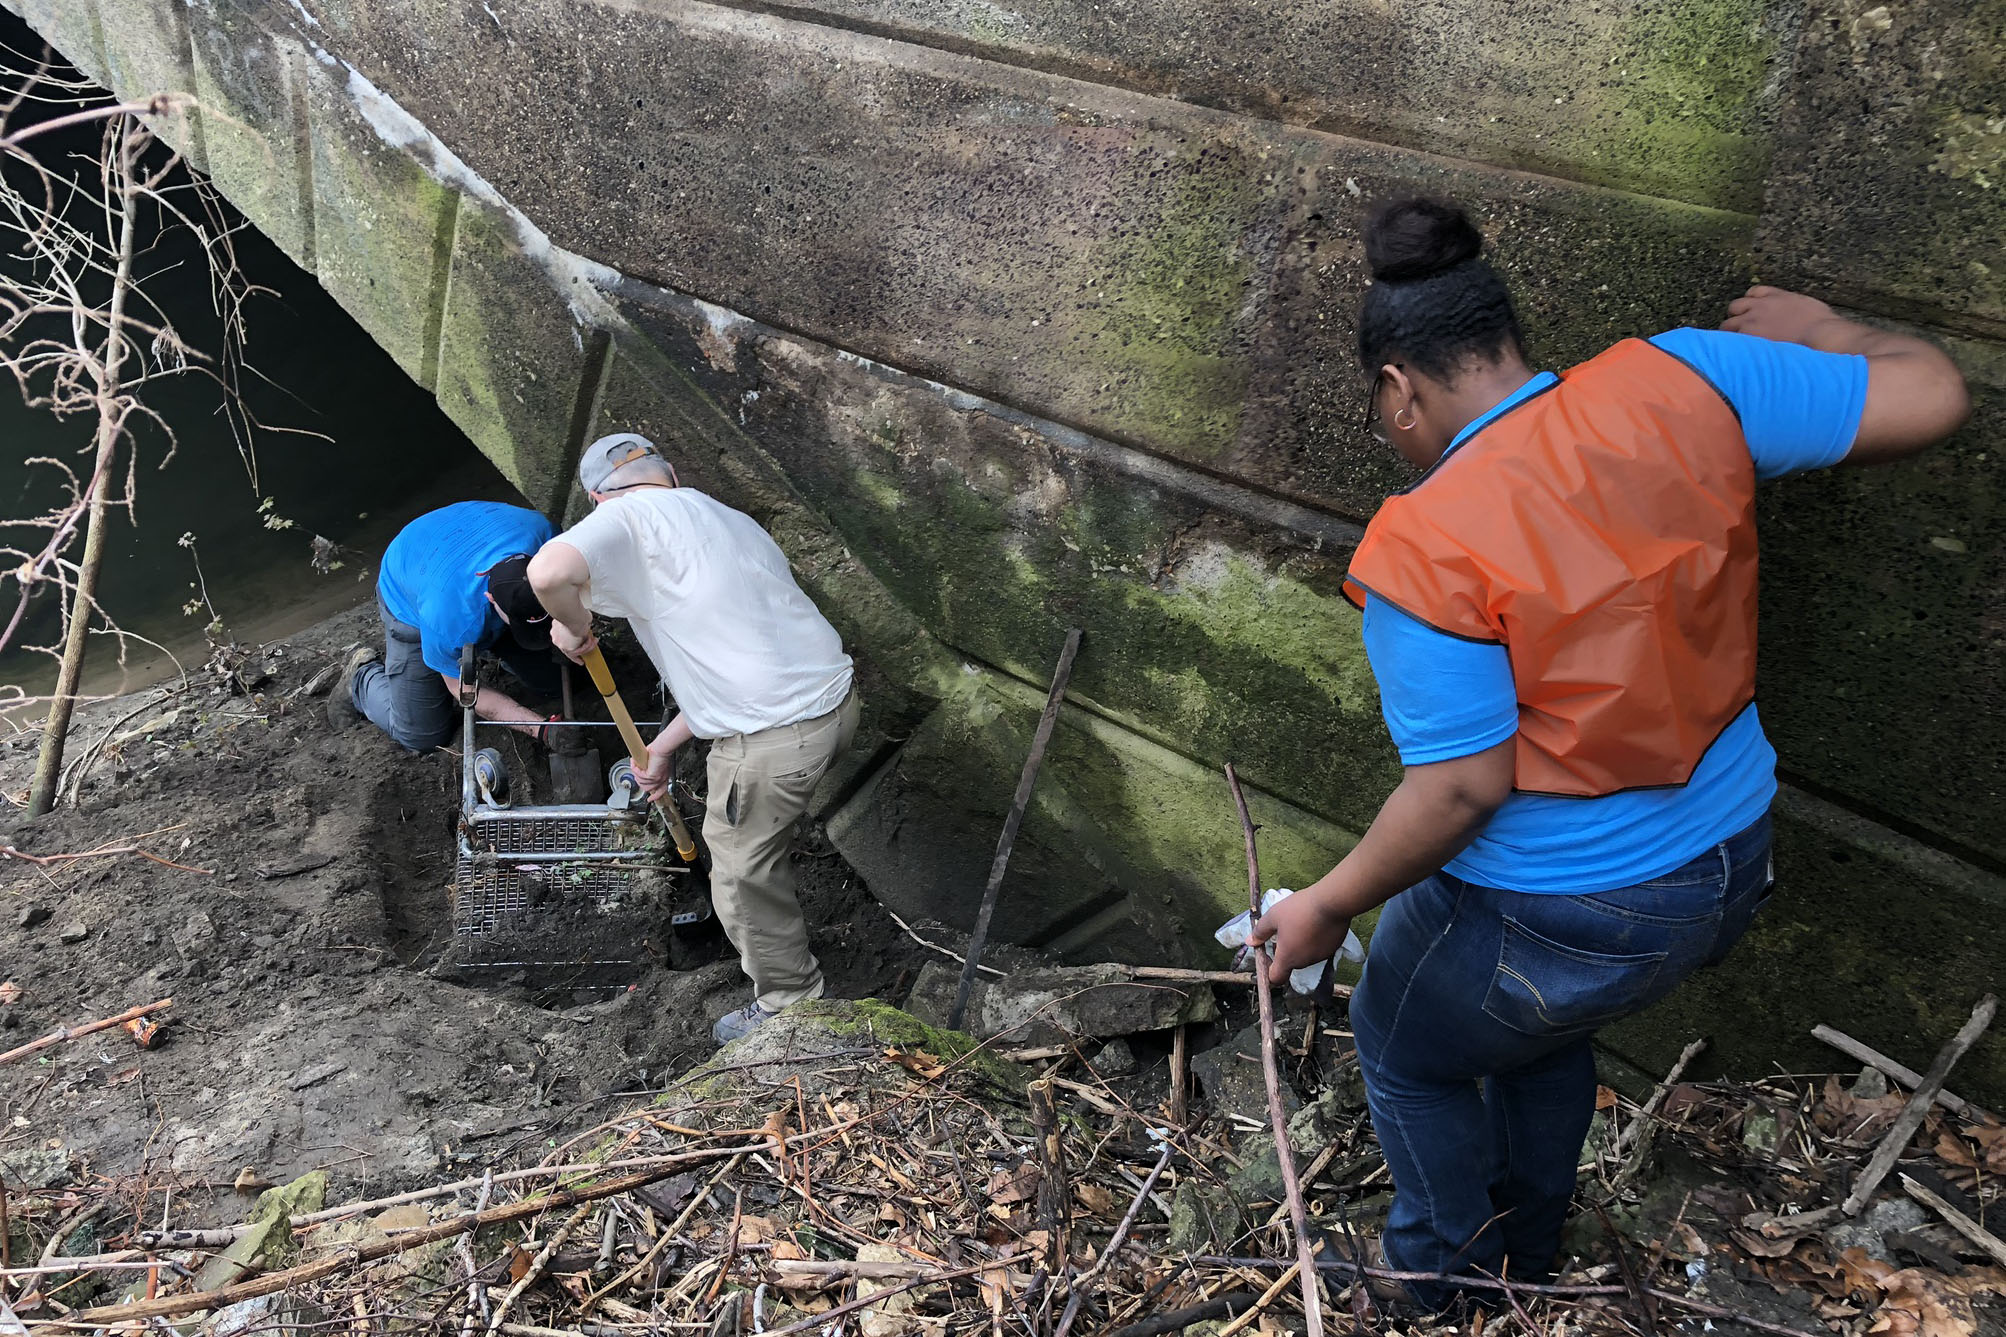 Two are at the bottom of the hill using shovels to excavate an overturned shopping cart partially buried in the silt at the edge of a creek, under the arc of a concrete bridge. A third, holding a pair of work gloves in one hand while bracing against the bridge with the other, carefully steps down the hill to join them.